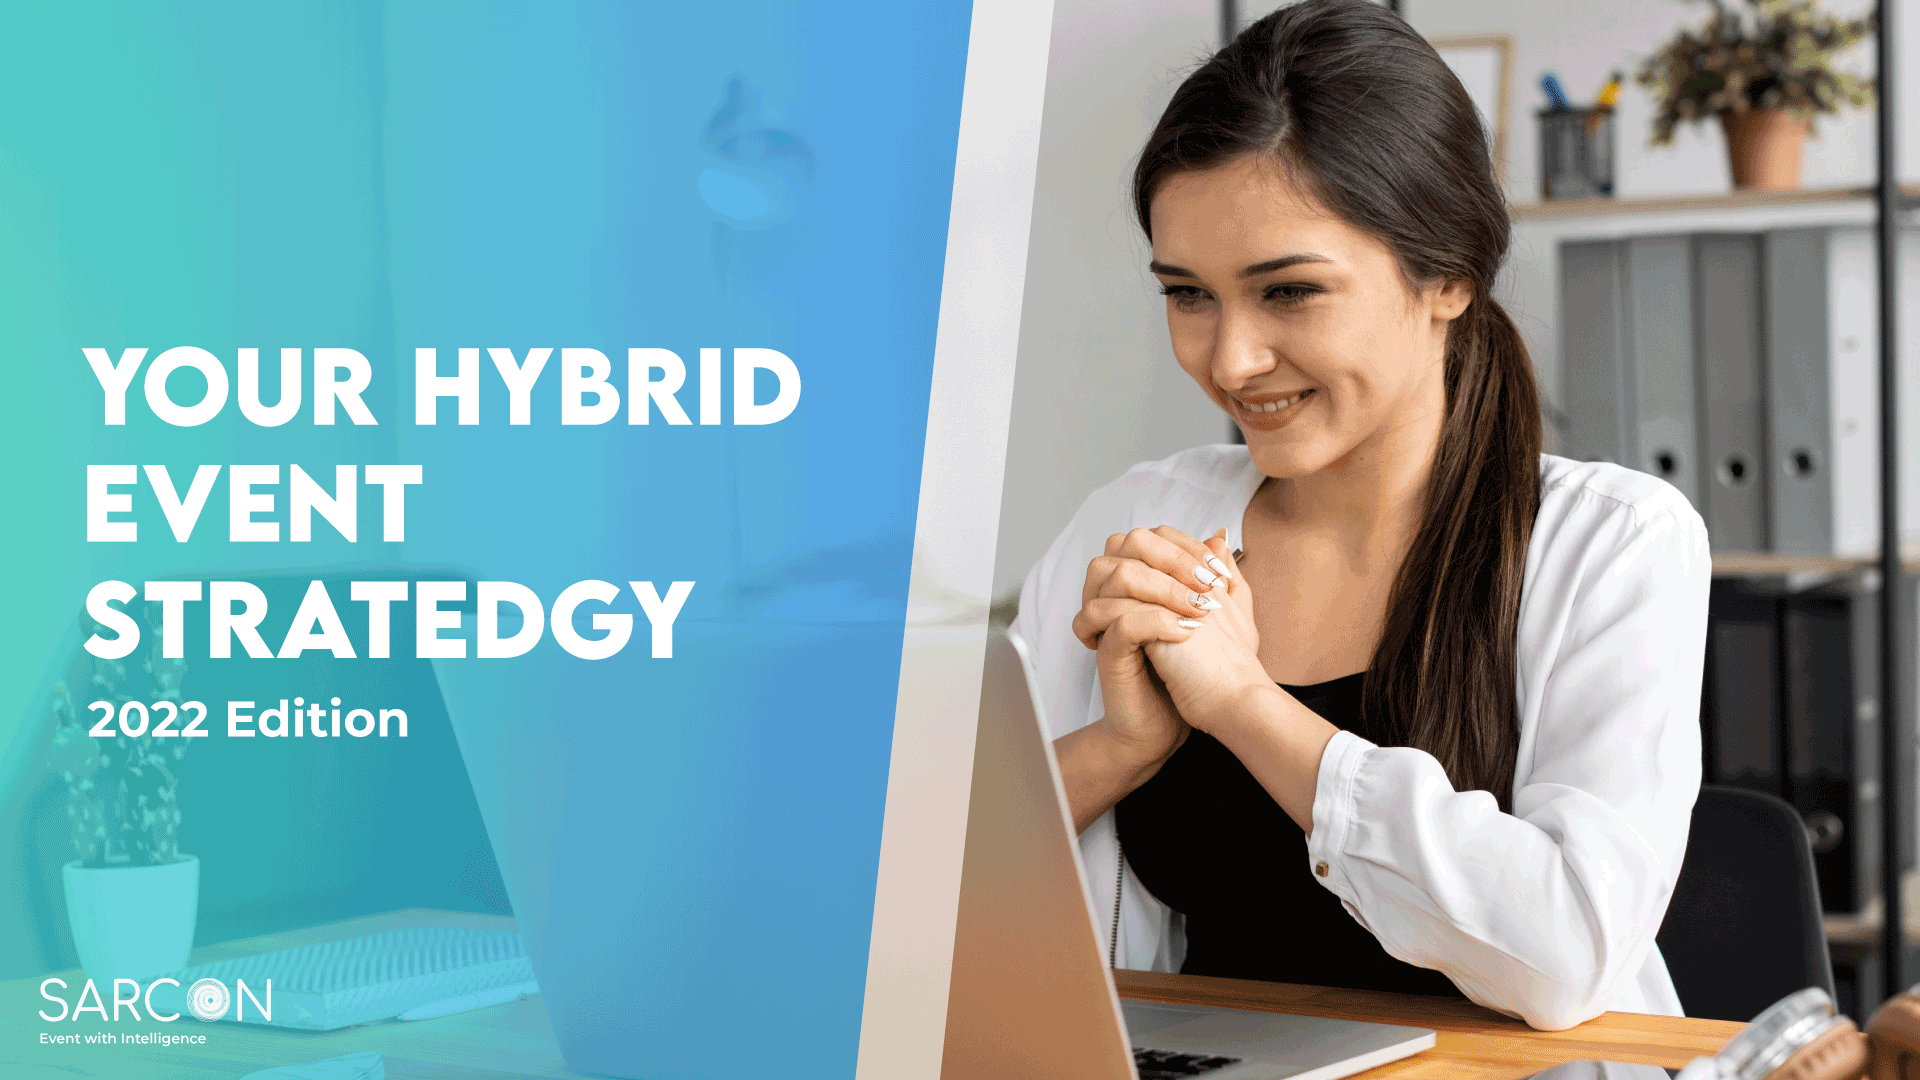 Your Hybrid Event Strategy 2022